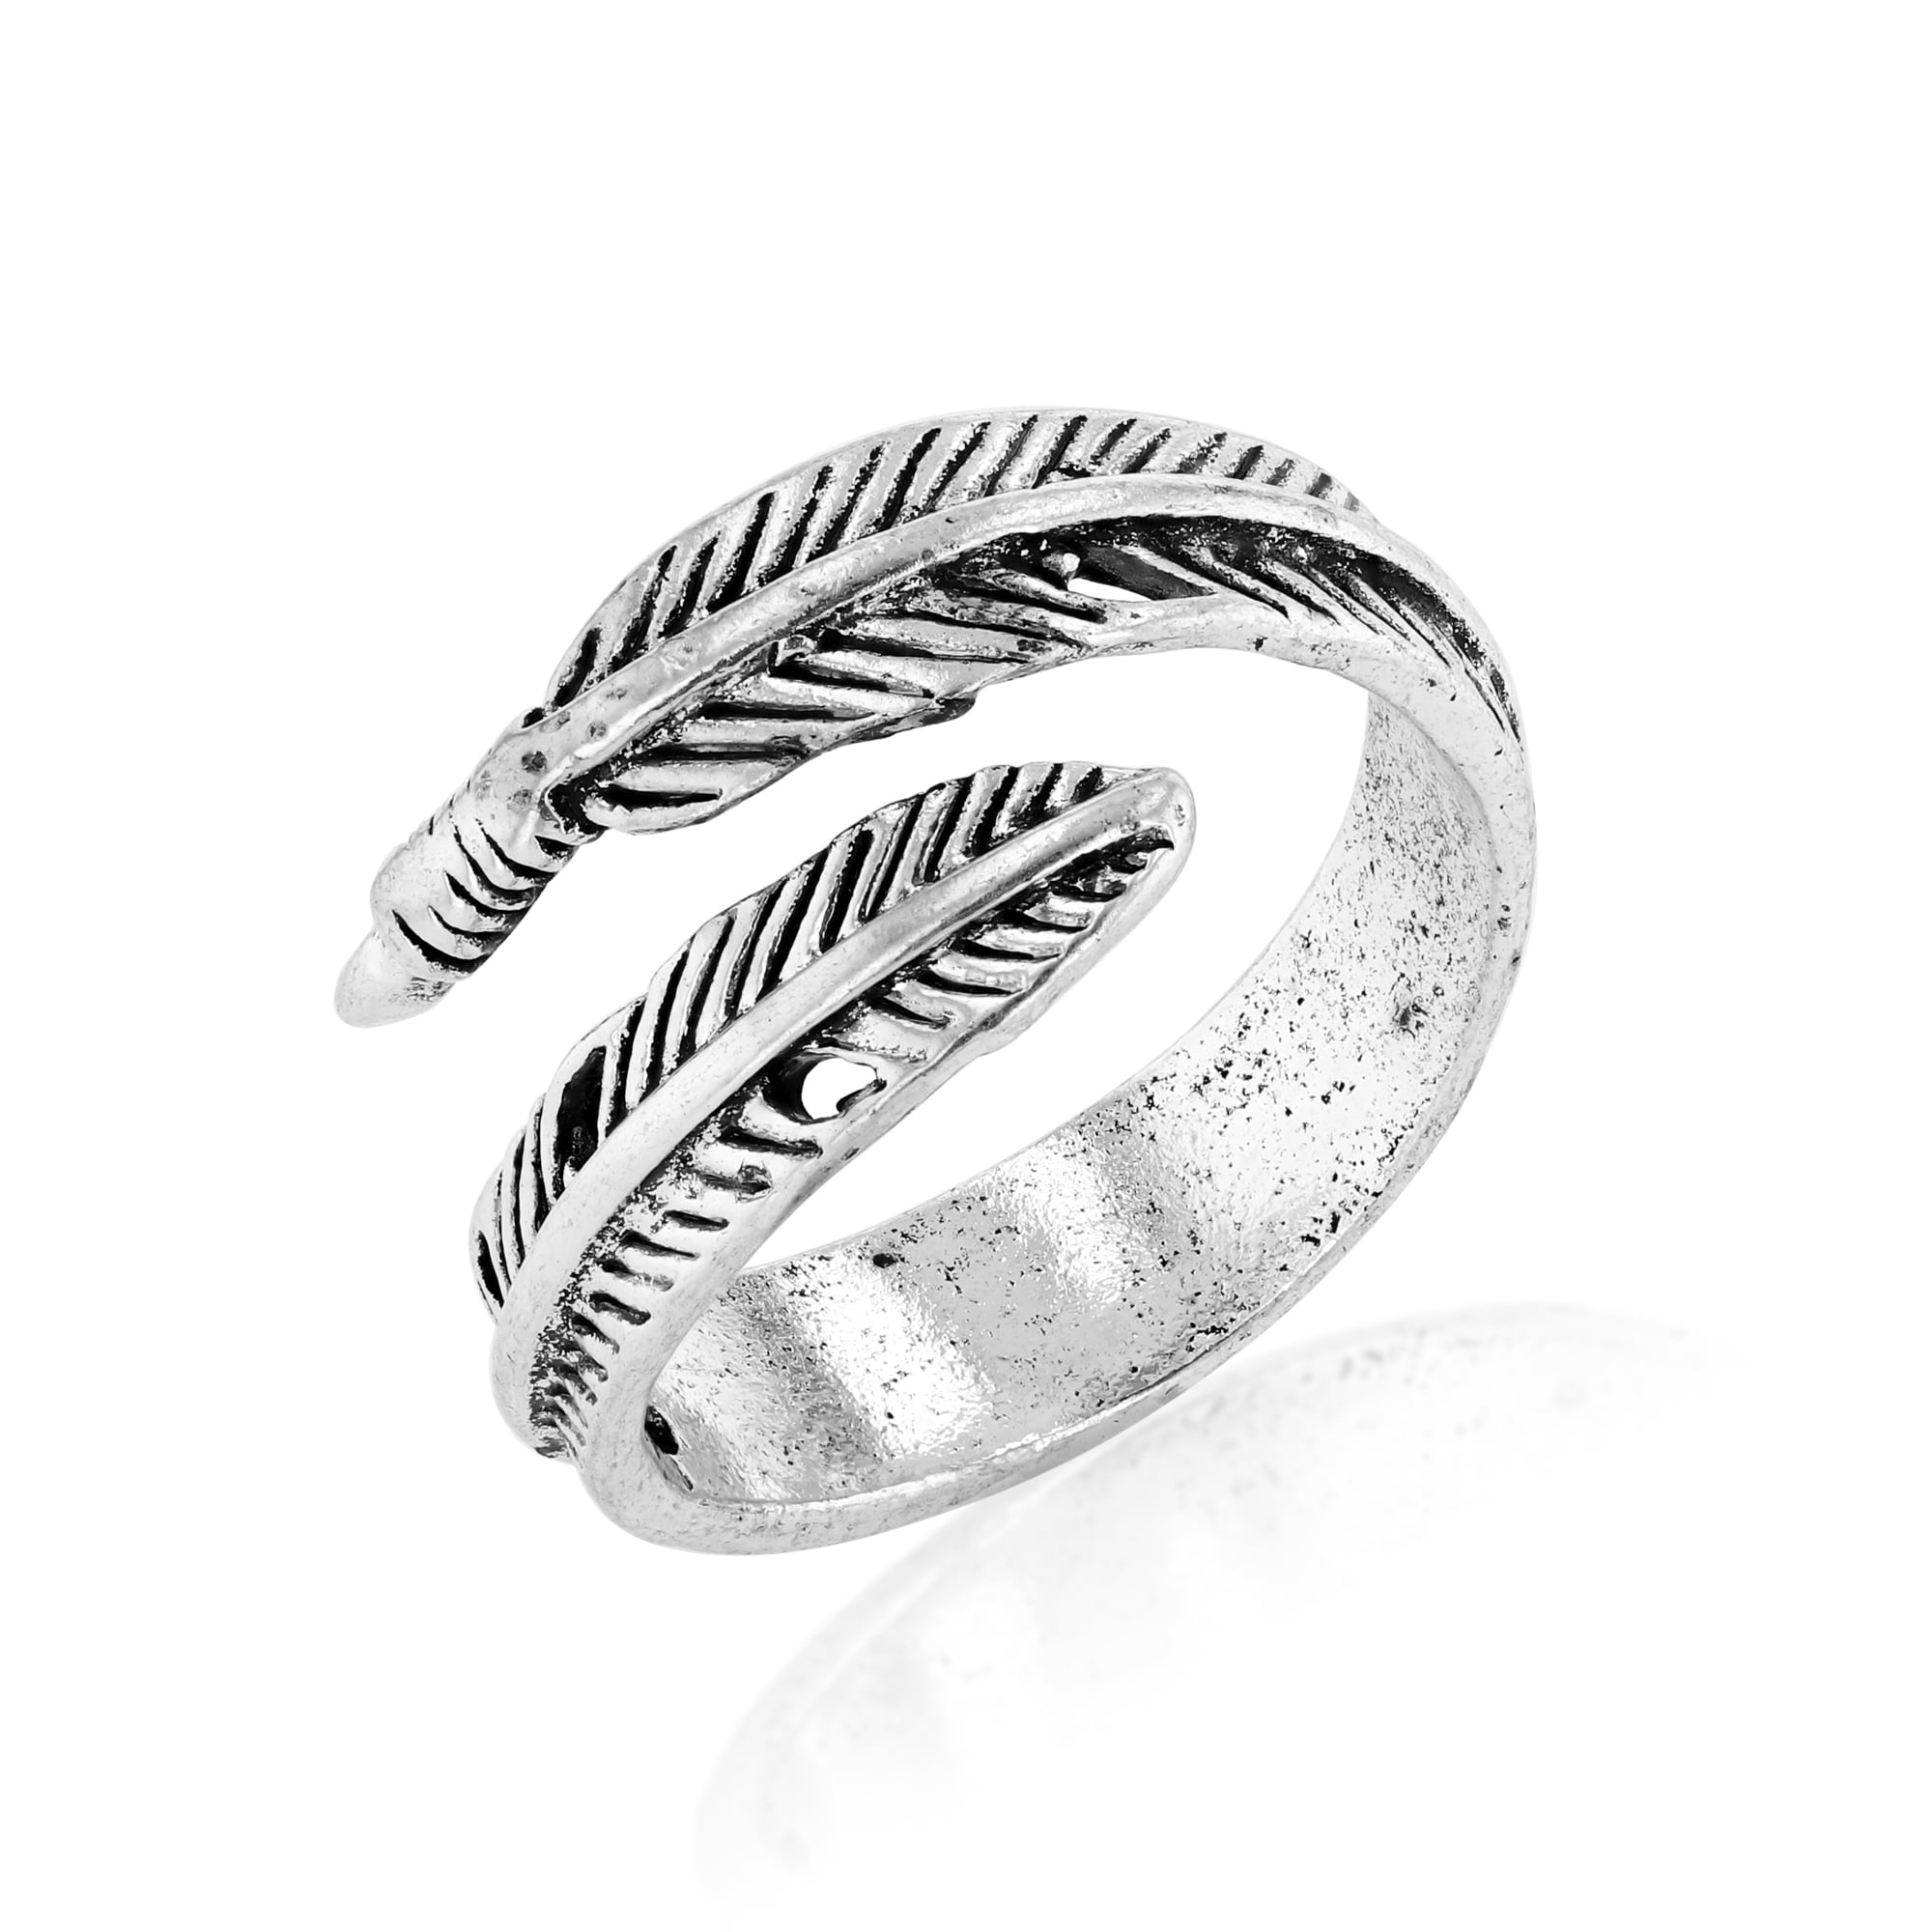 Feather Ring  small flight feather  silver feather